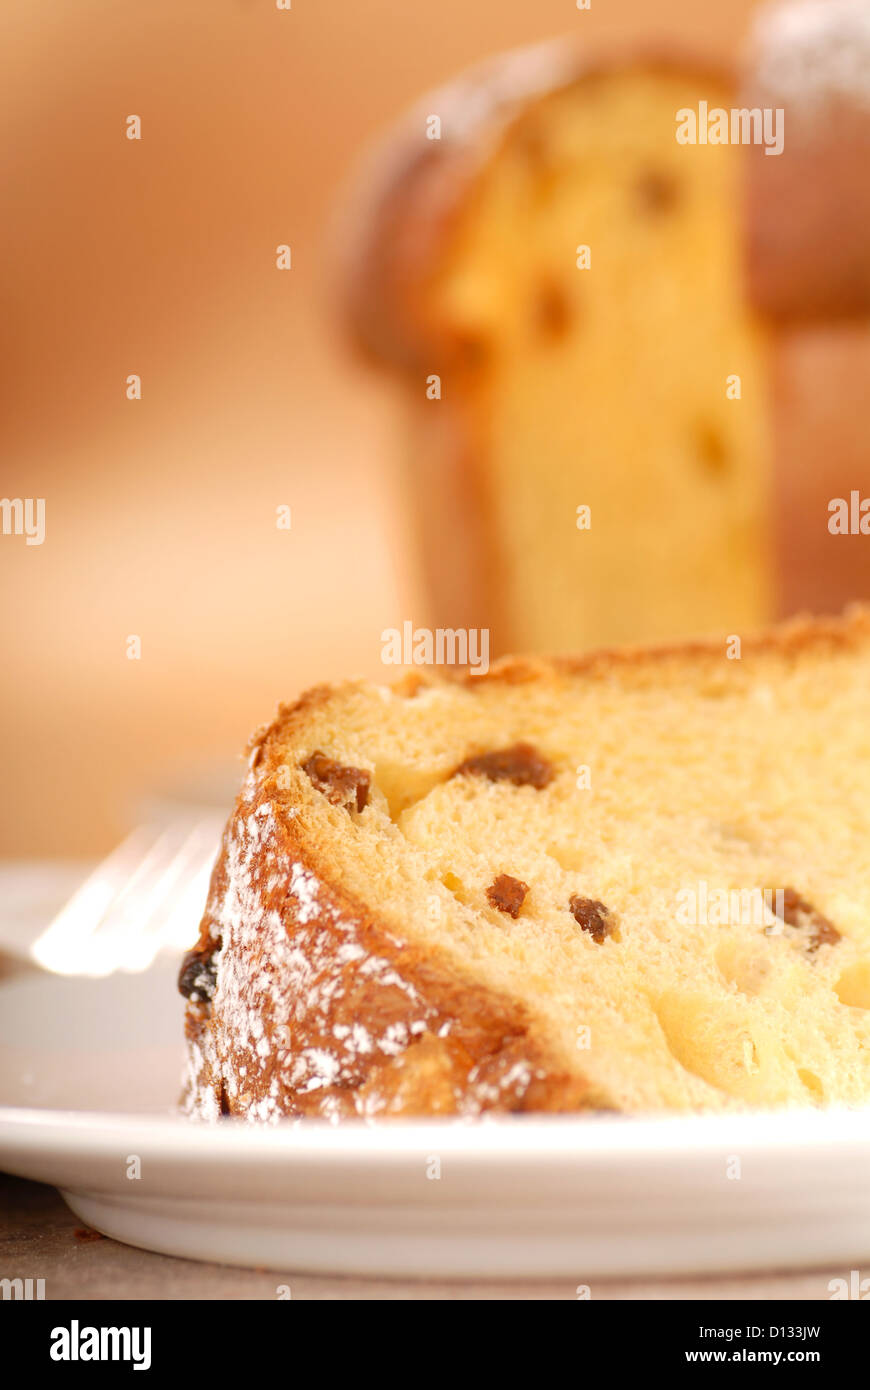 Freshly baked Italian Panettone Christmas Bread with a slice cut out Stock Photo